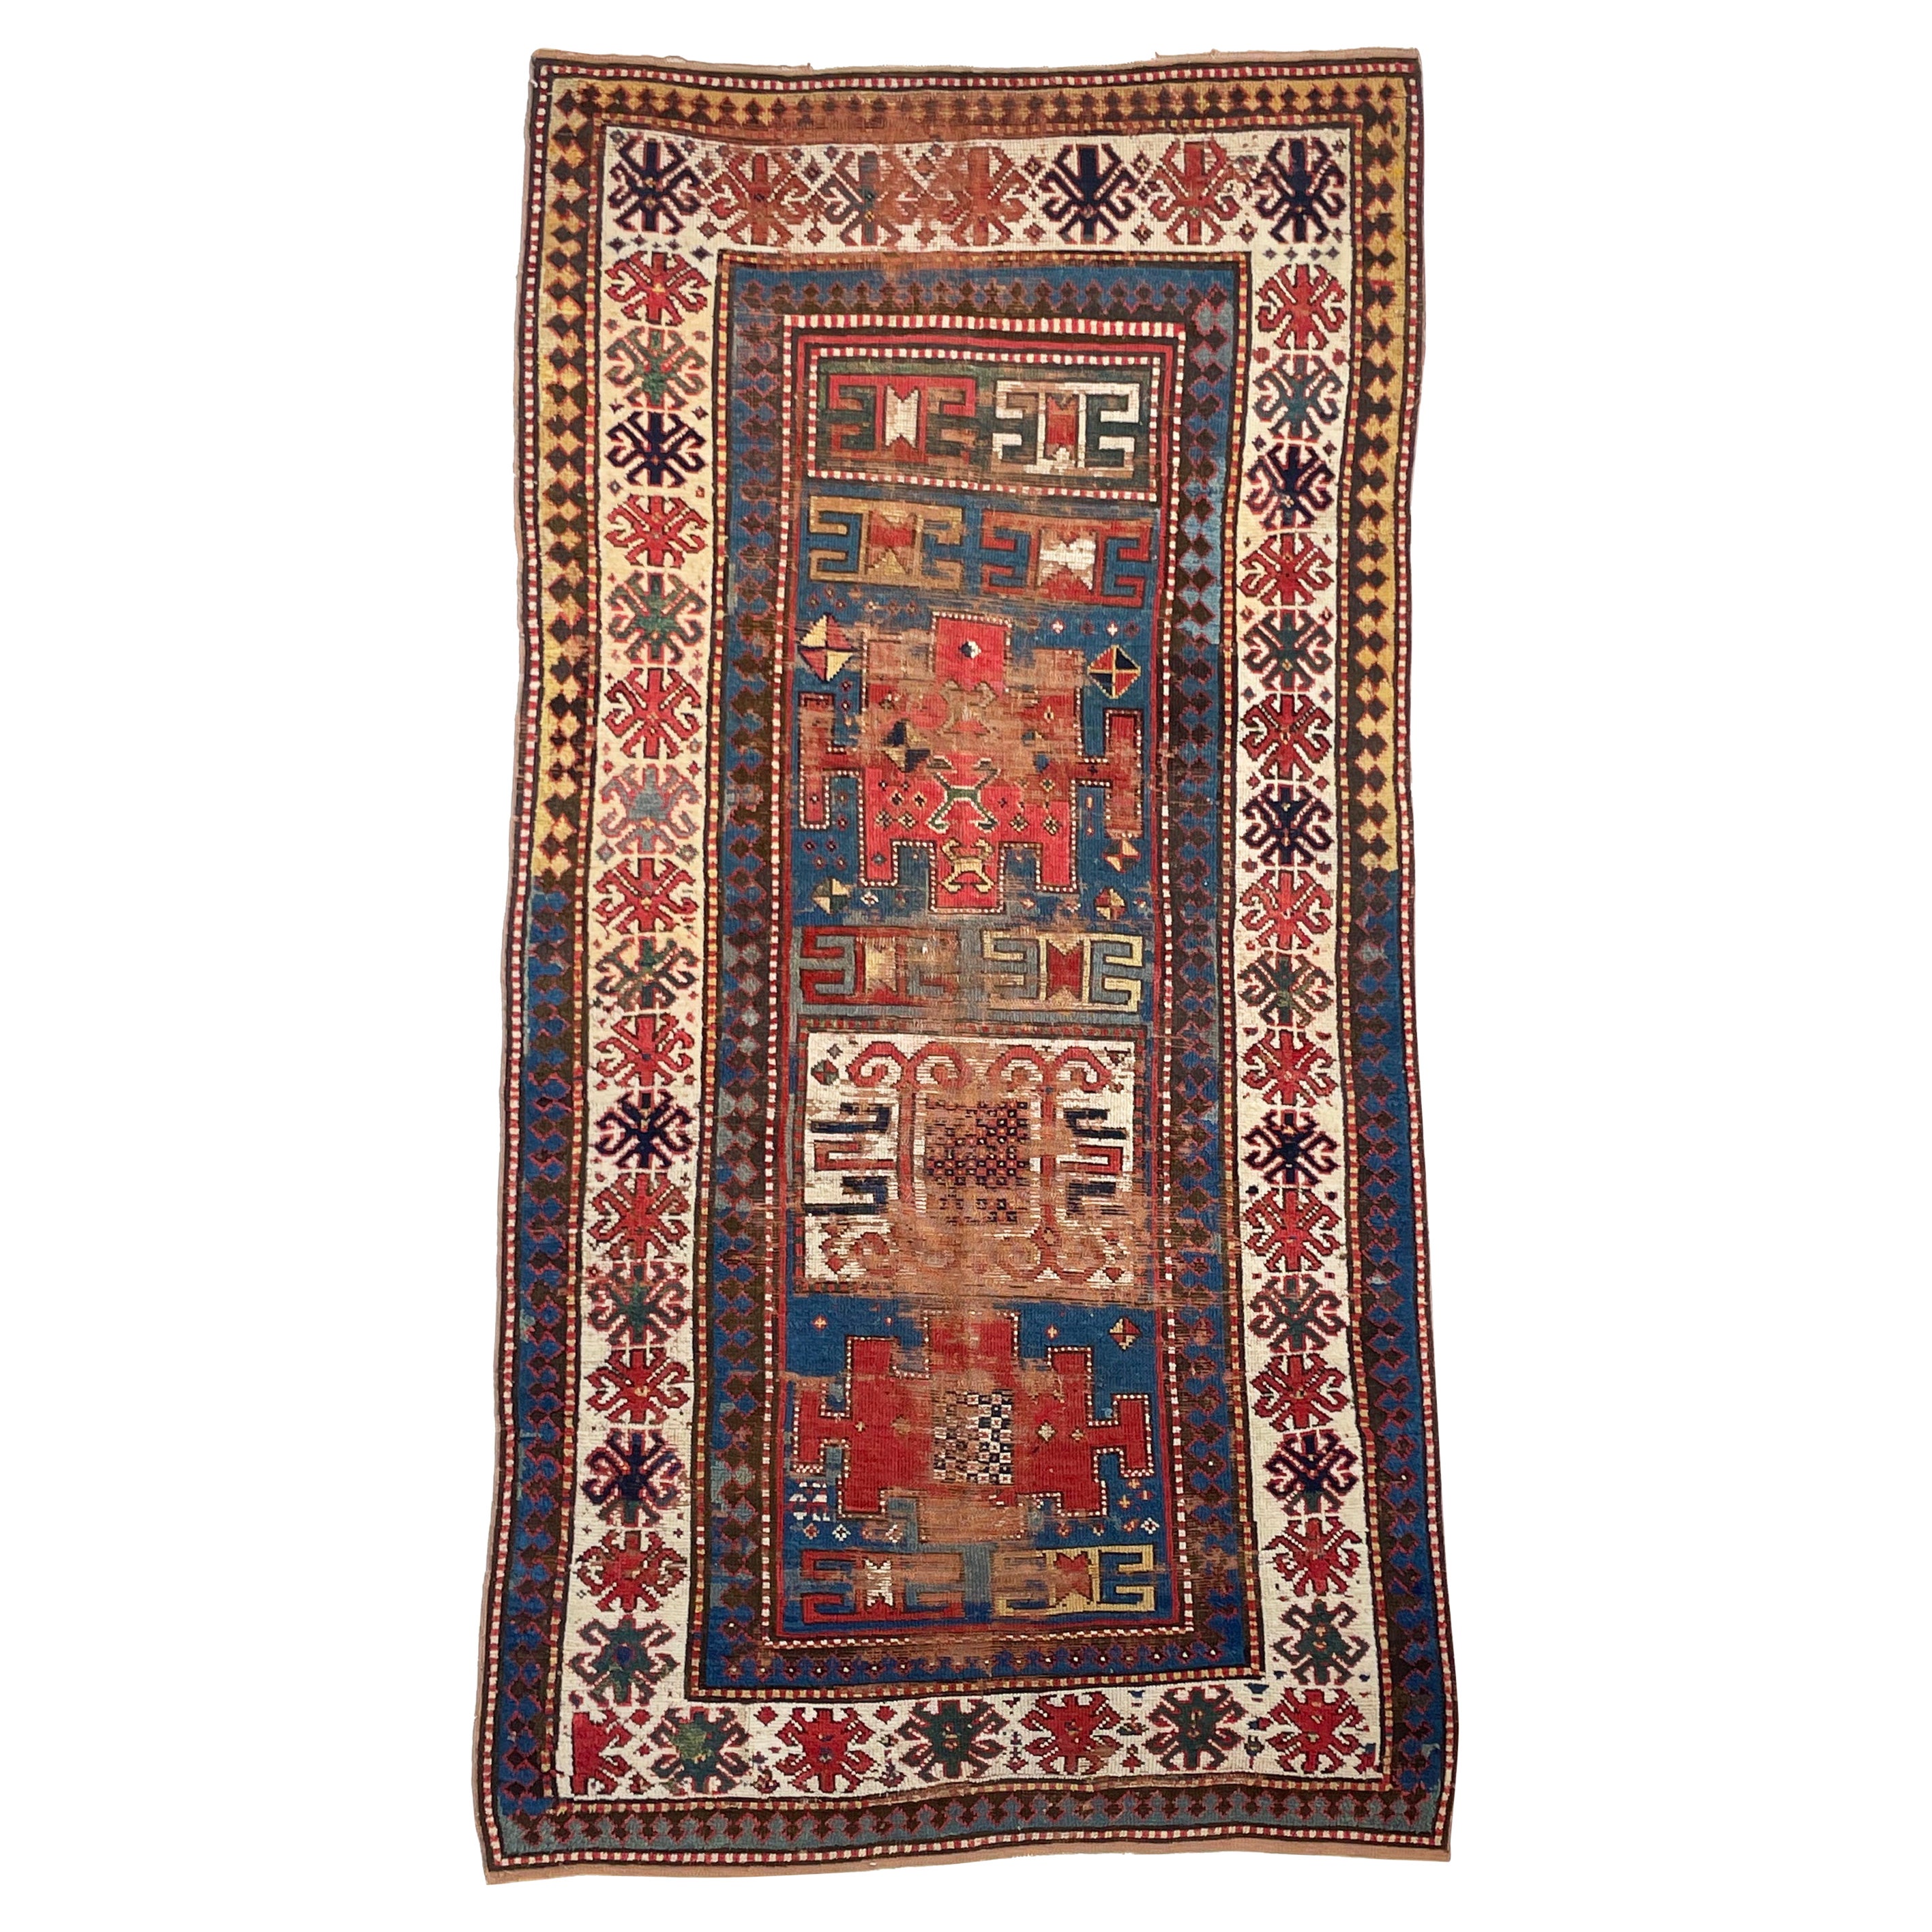 Antique Kazak Rug with Iconic Fence of Protection Perimeter, c. 1920-30's For Sale